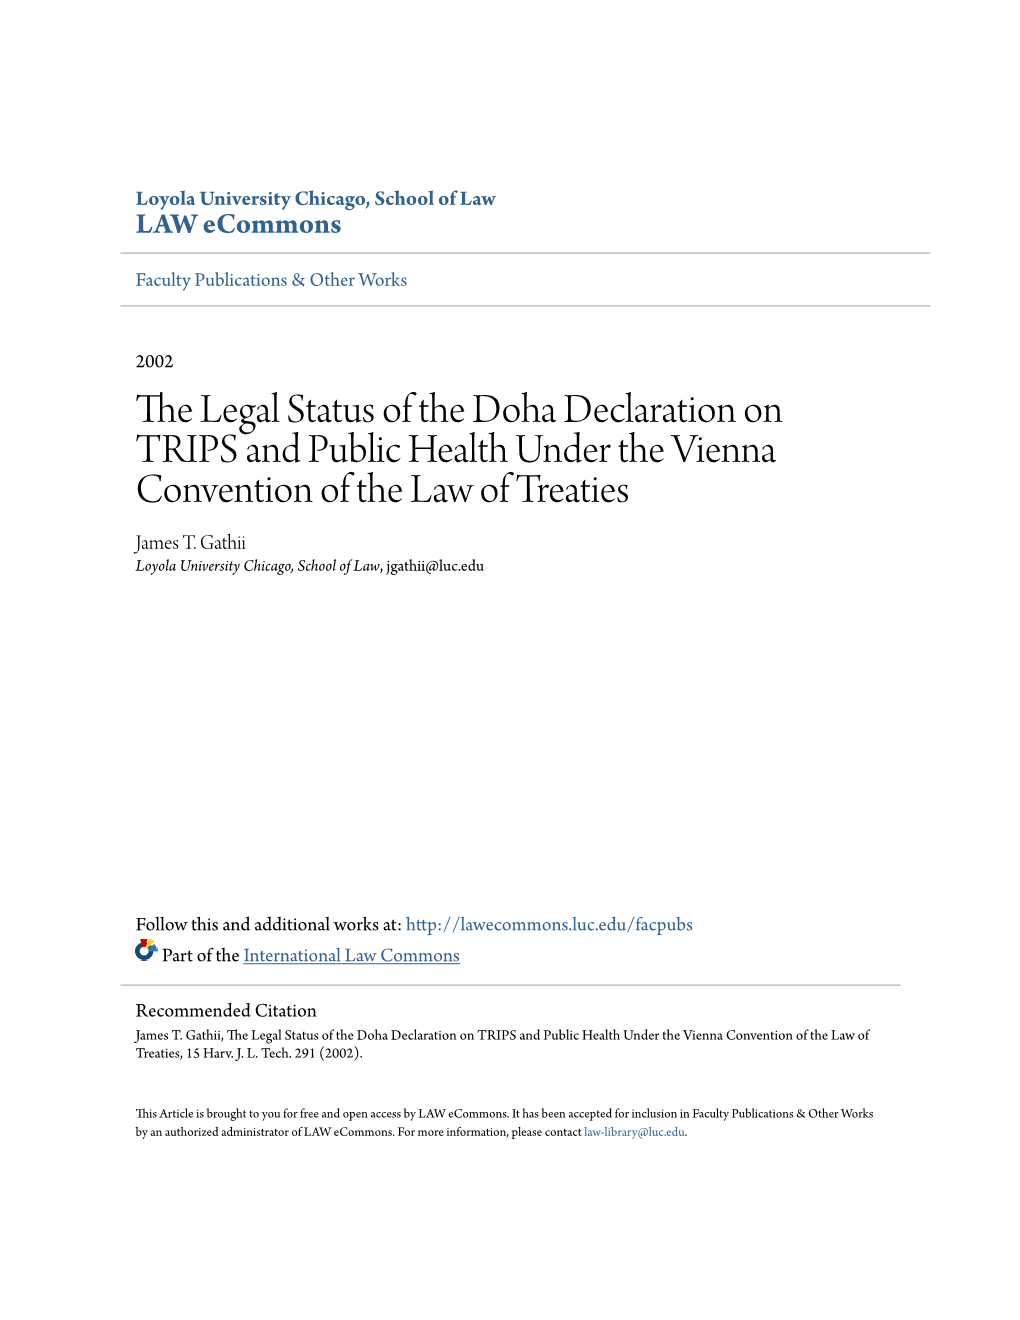 The Legal Status of the Doha Declaration on TRIPS and Public Health Under the Vienna Convention of the Law of Treaties James T